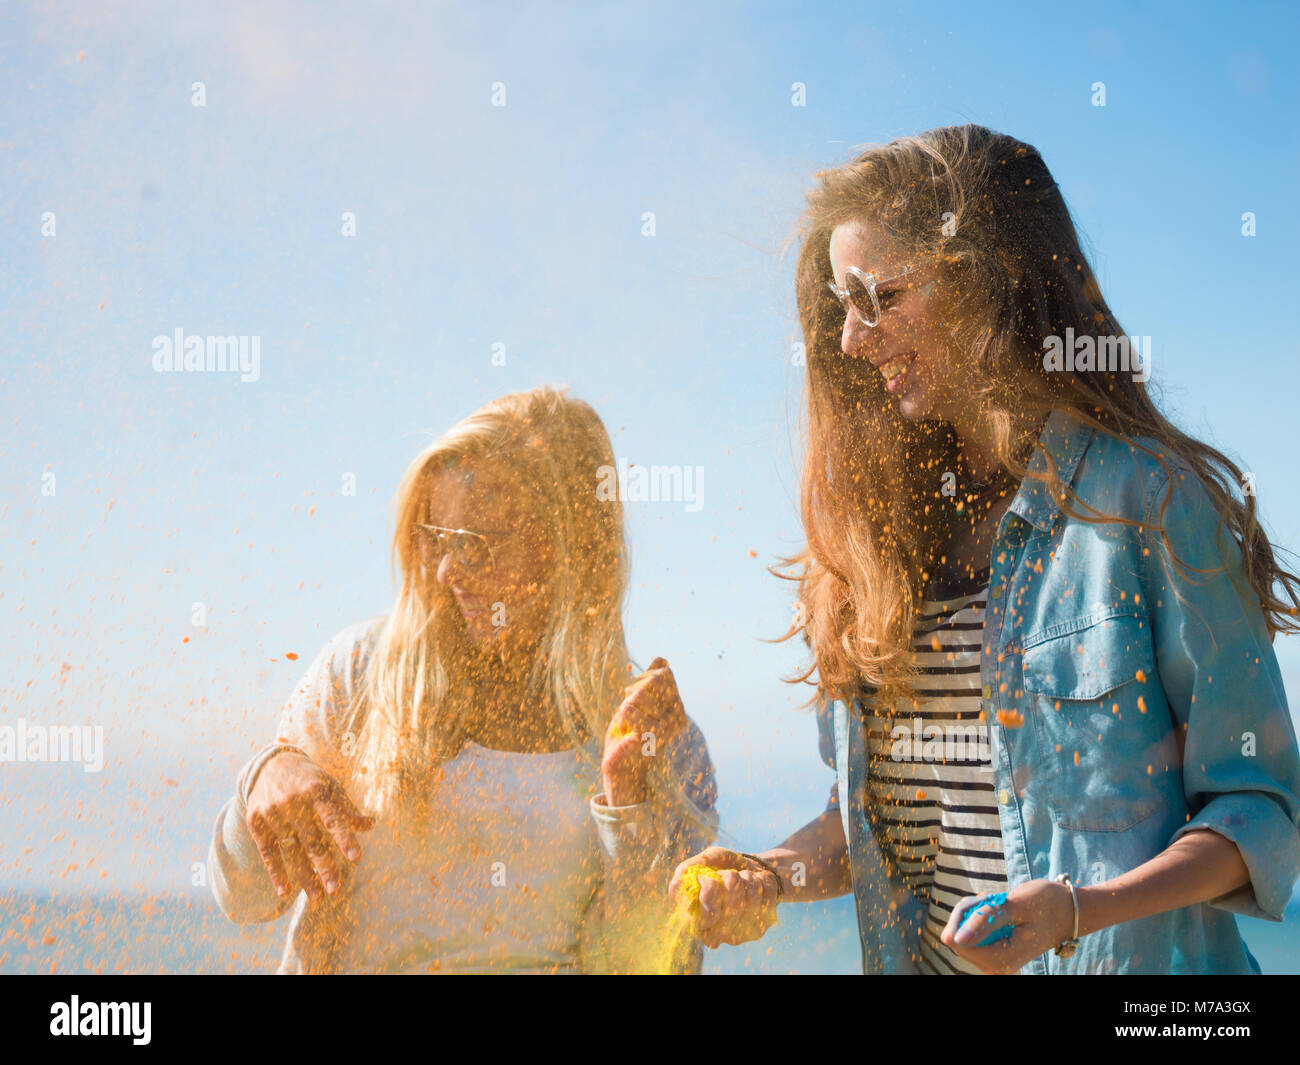 Two Beautiful Happy Girls Celebrate Holi Festival By Throwing Colorful Powder in the Air and Laughing. They're By the Sea and Have Lots of Fun. Stock Photo